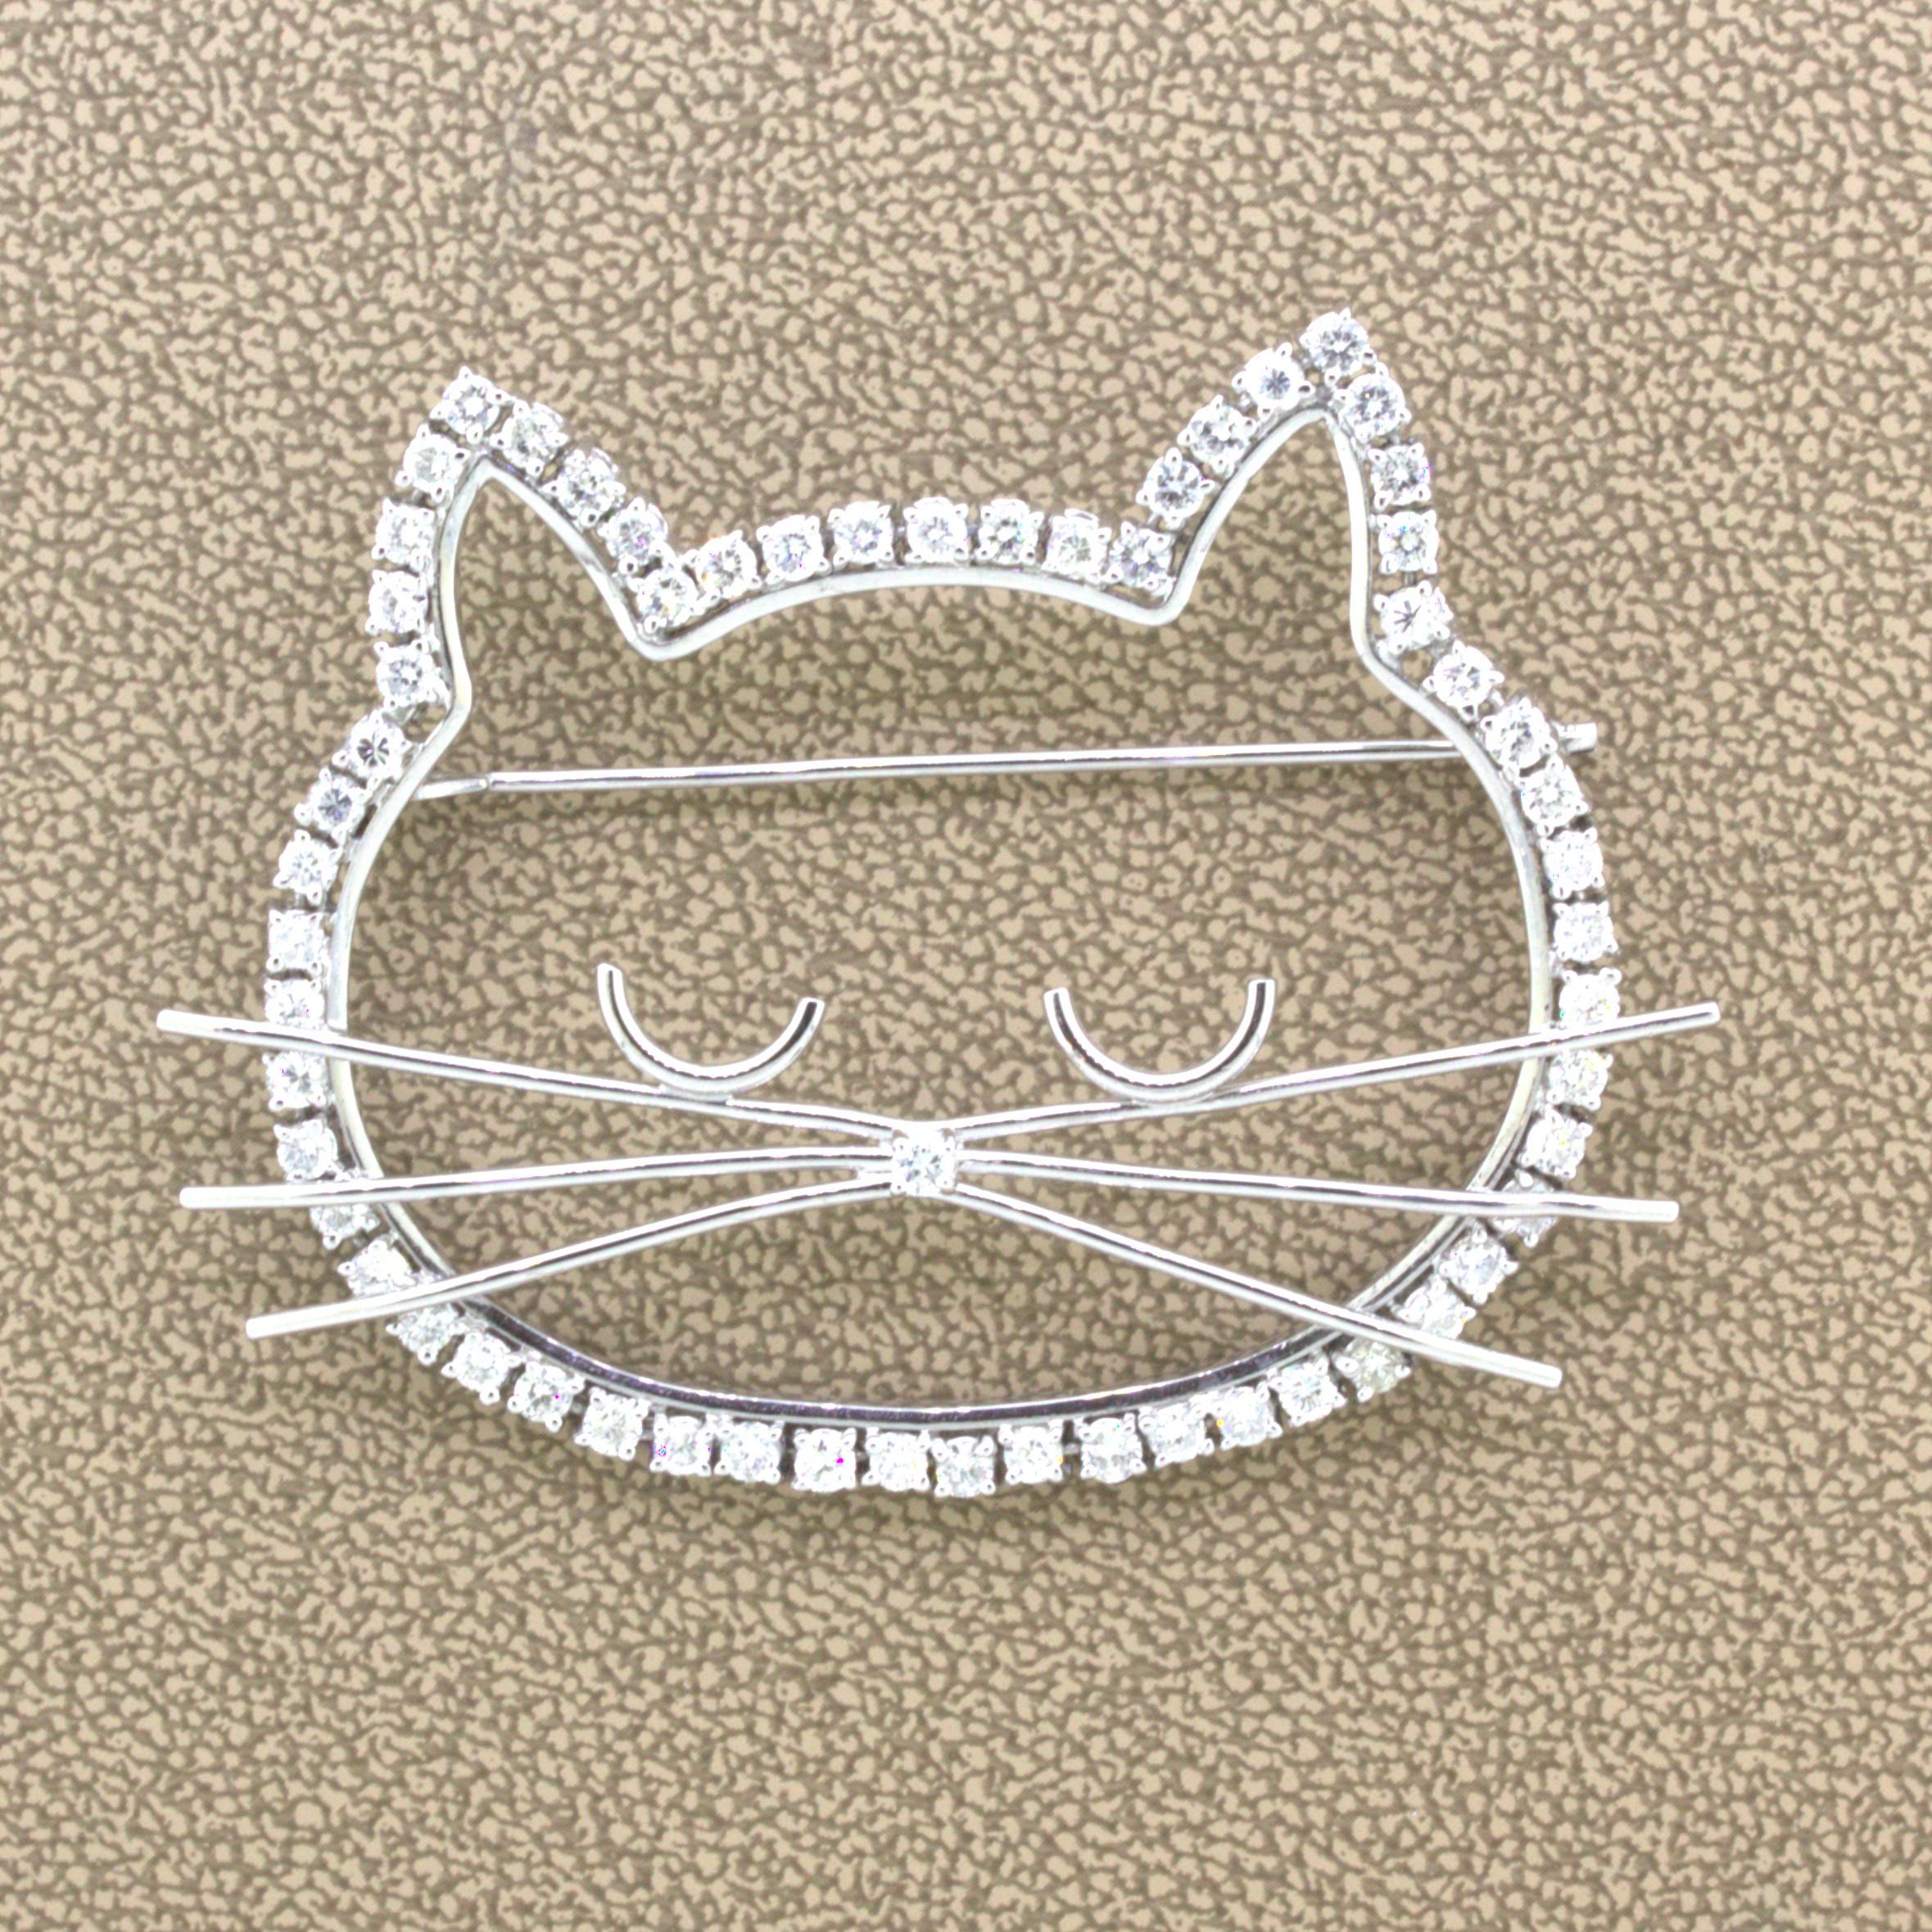 A sweet and stylish brooch of a sleeping kitty cat! It features 2.61 carats of round brilliant-cut diamonds set around the border of the piece as well as used for the nose of the cat. Platinum whiskers radiate from its center giving the piece extra